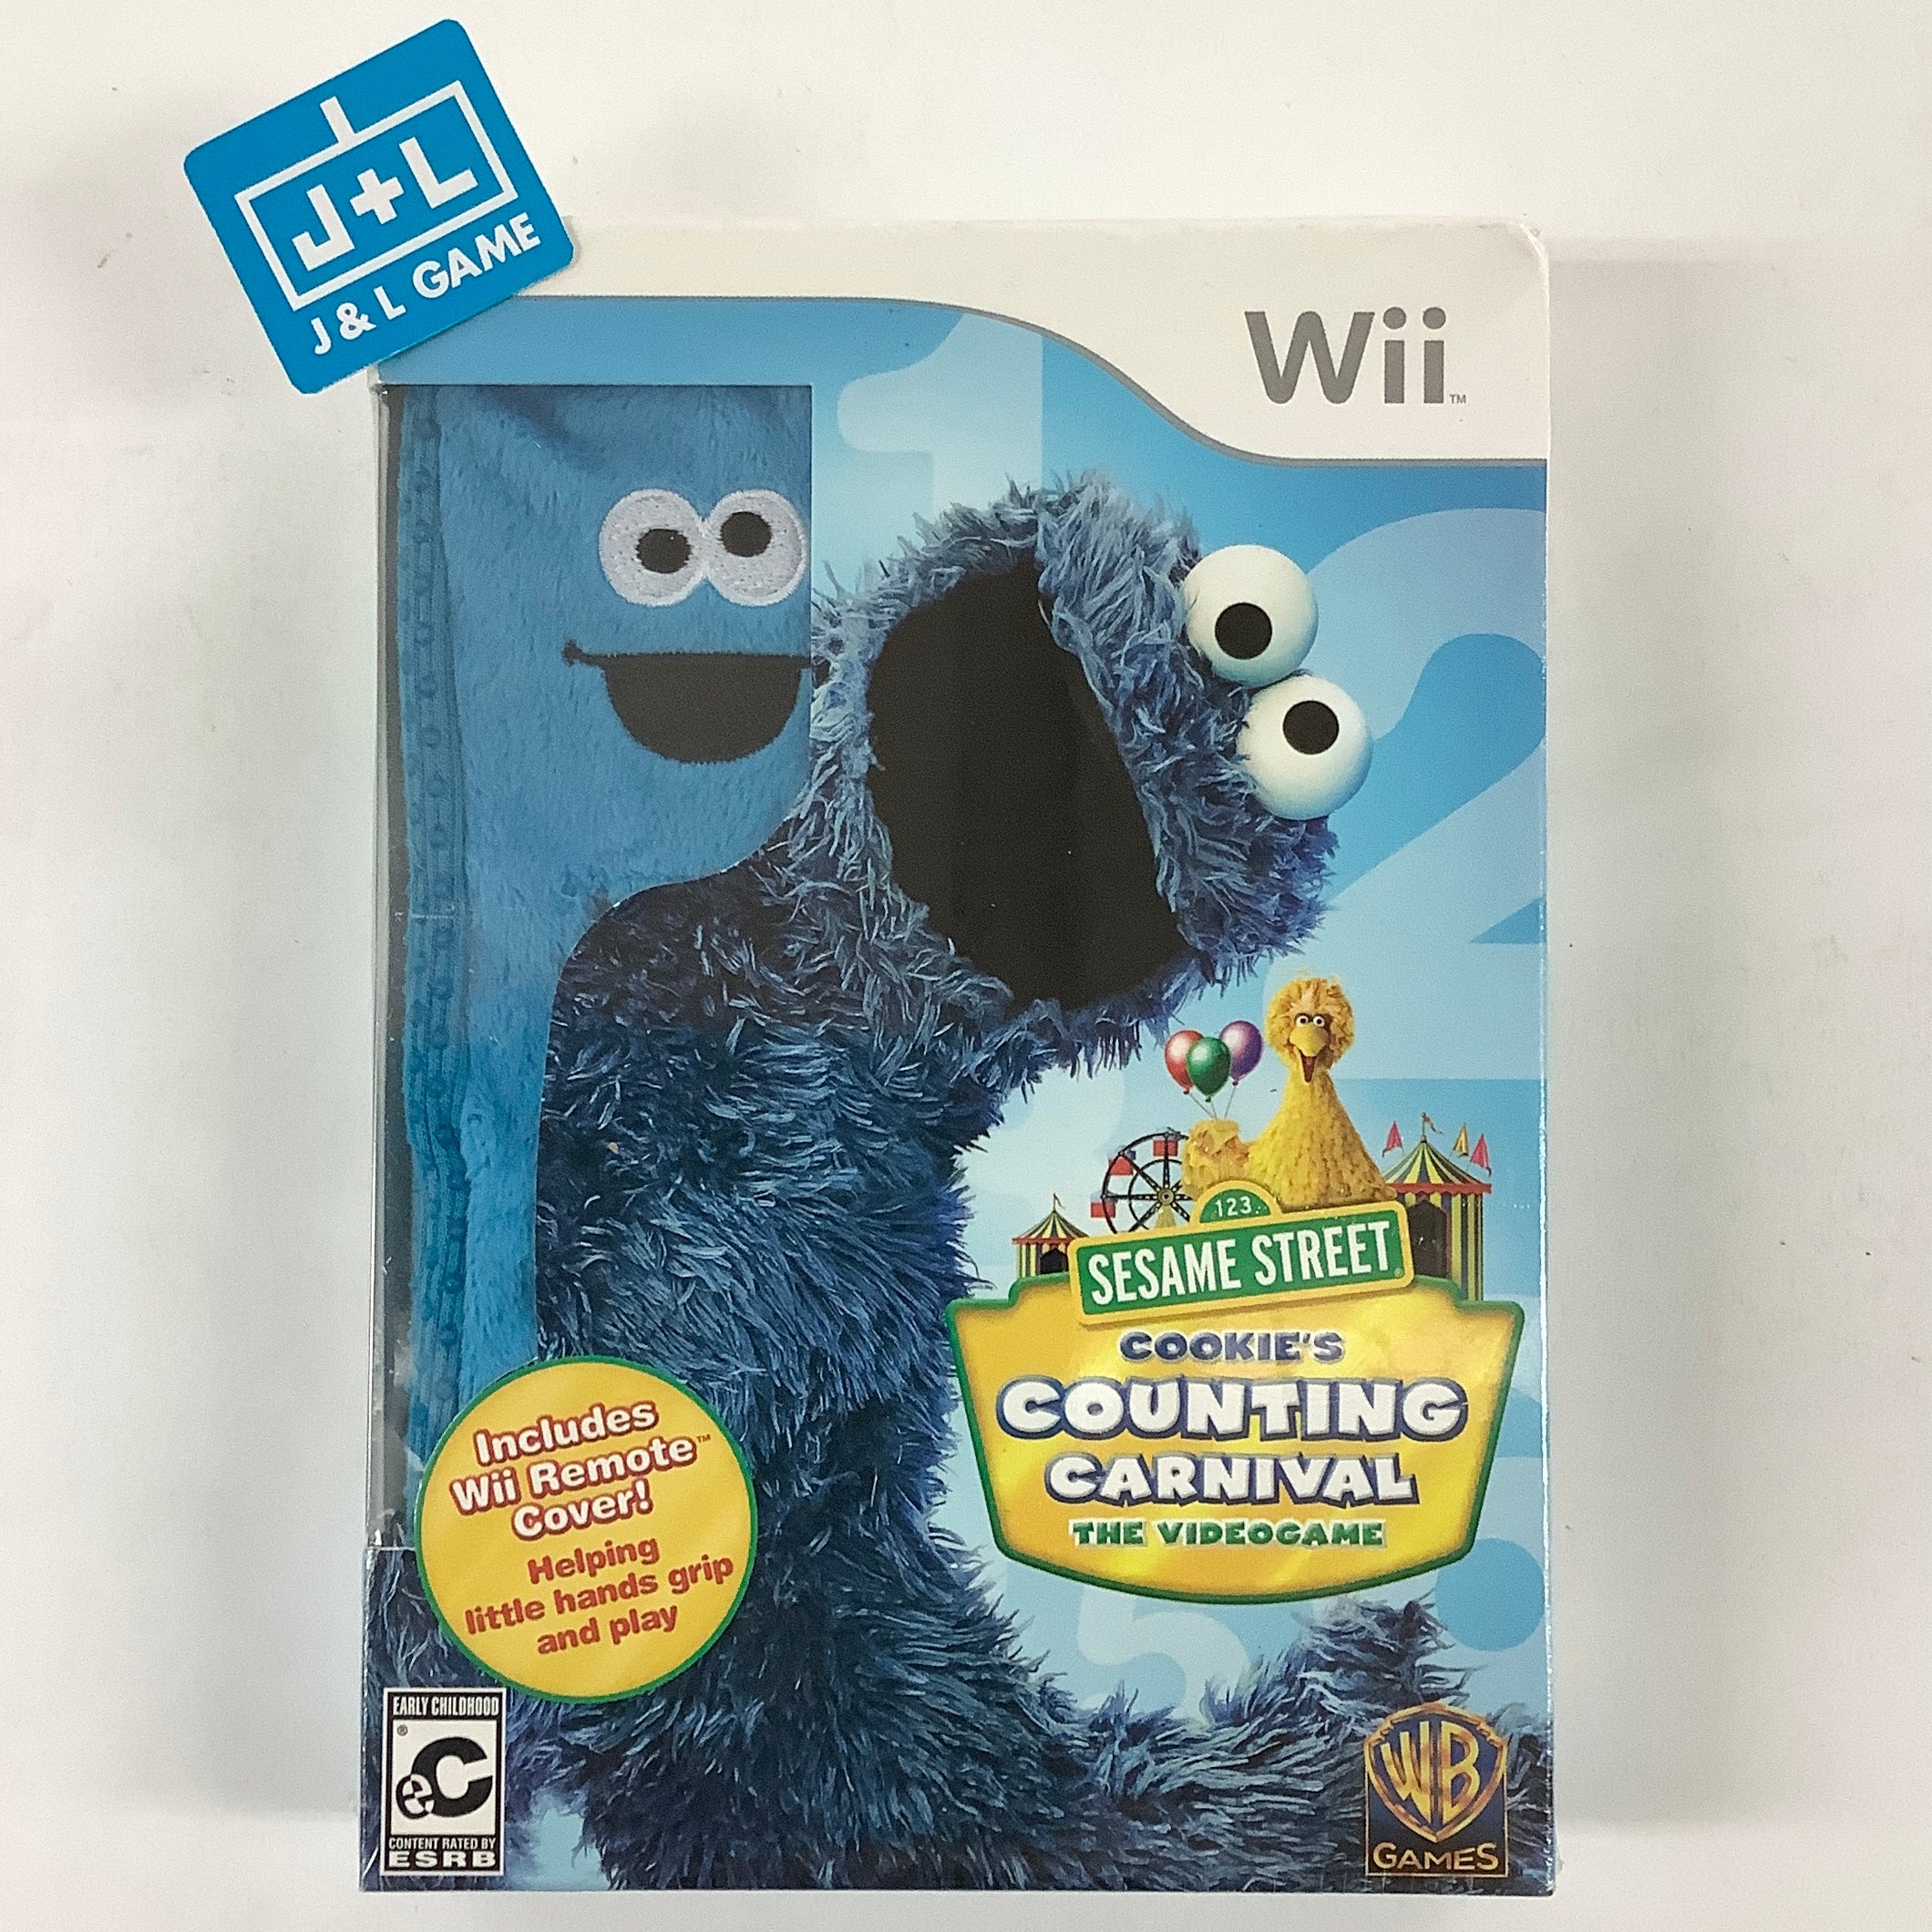 Sesame Street: Cookie's Counting Carnival - Nintendo Wii Video Games Warner Bros. Interactive Entertainment   